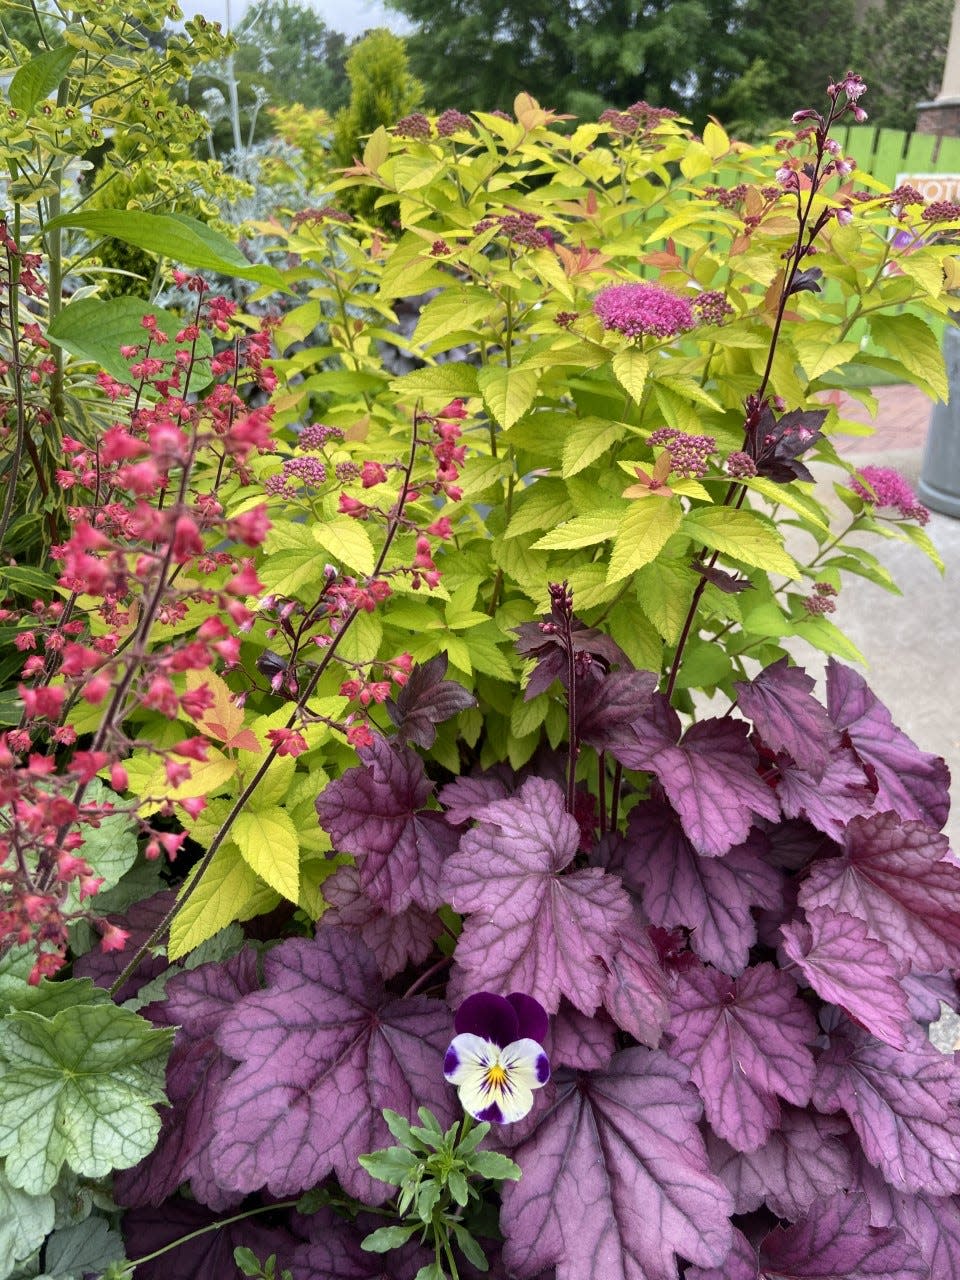 In this horse trough container Double Play Candy Corn spirea serves as a colorful backdrop or partnership with Primo Wild Rose and Dolce Spearmint heucheras.